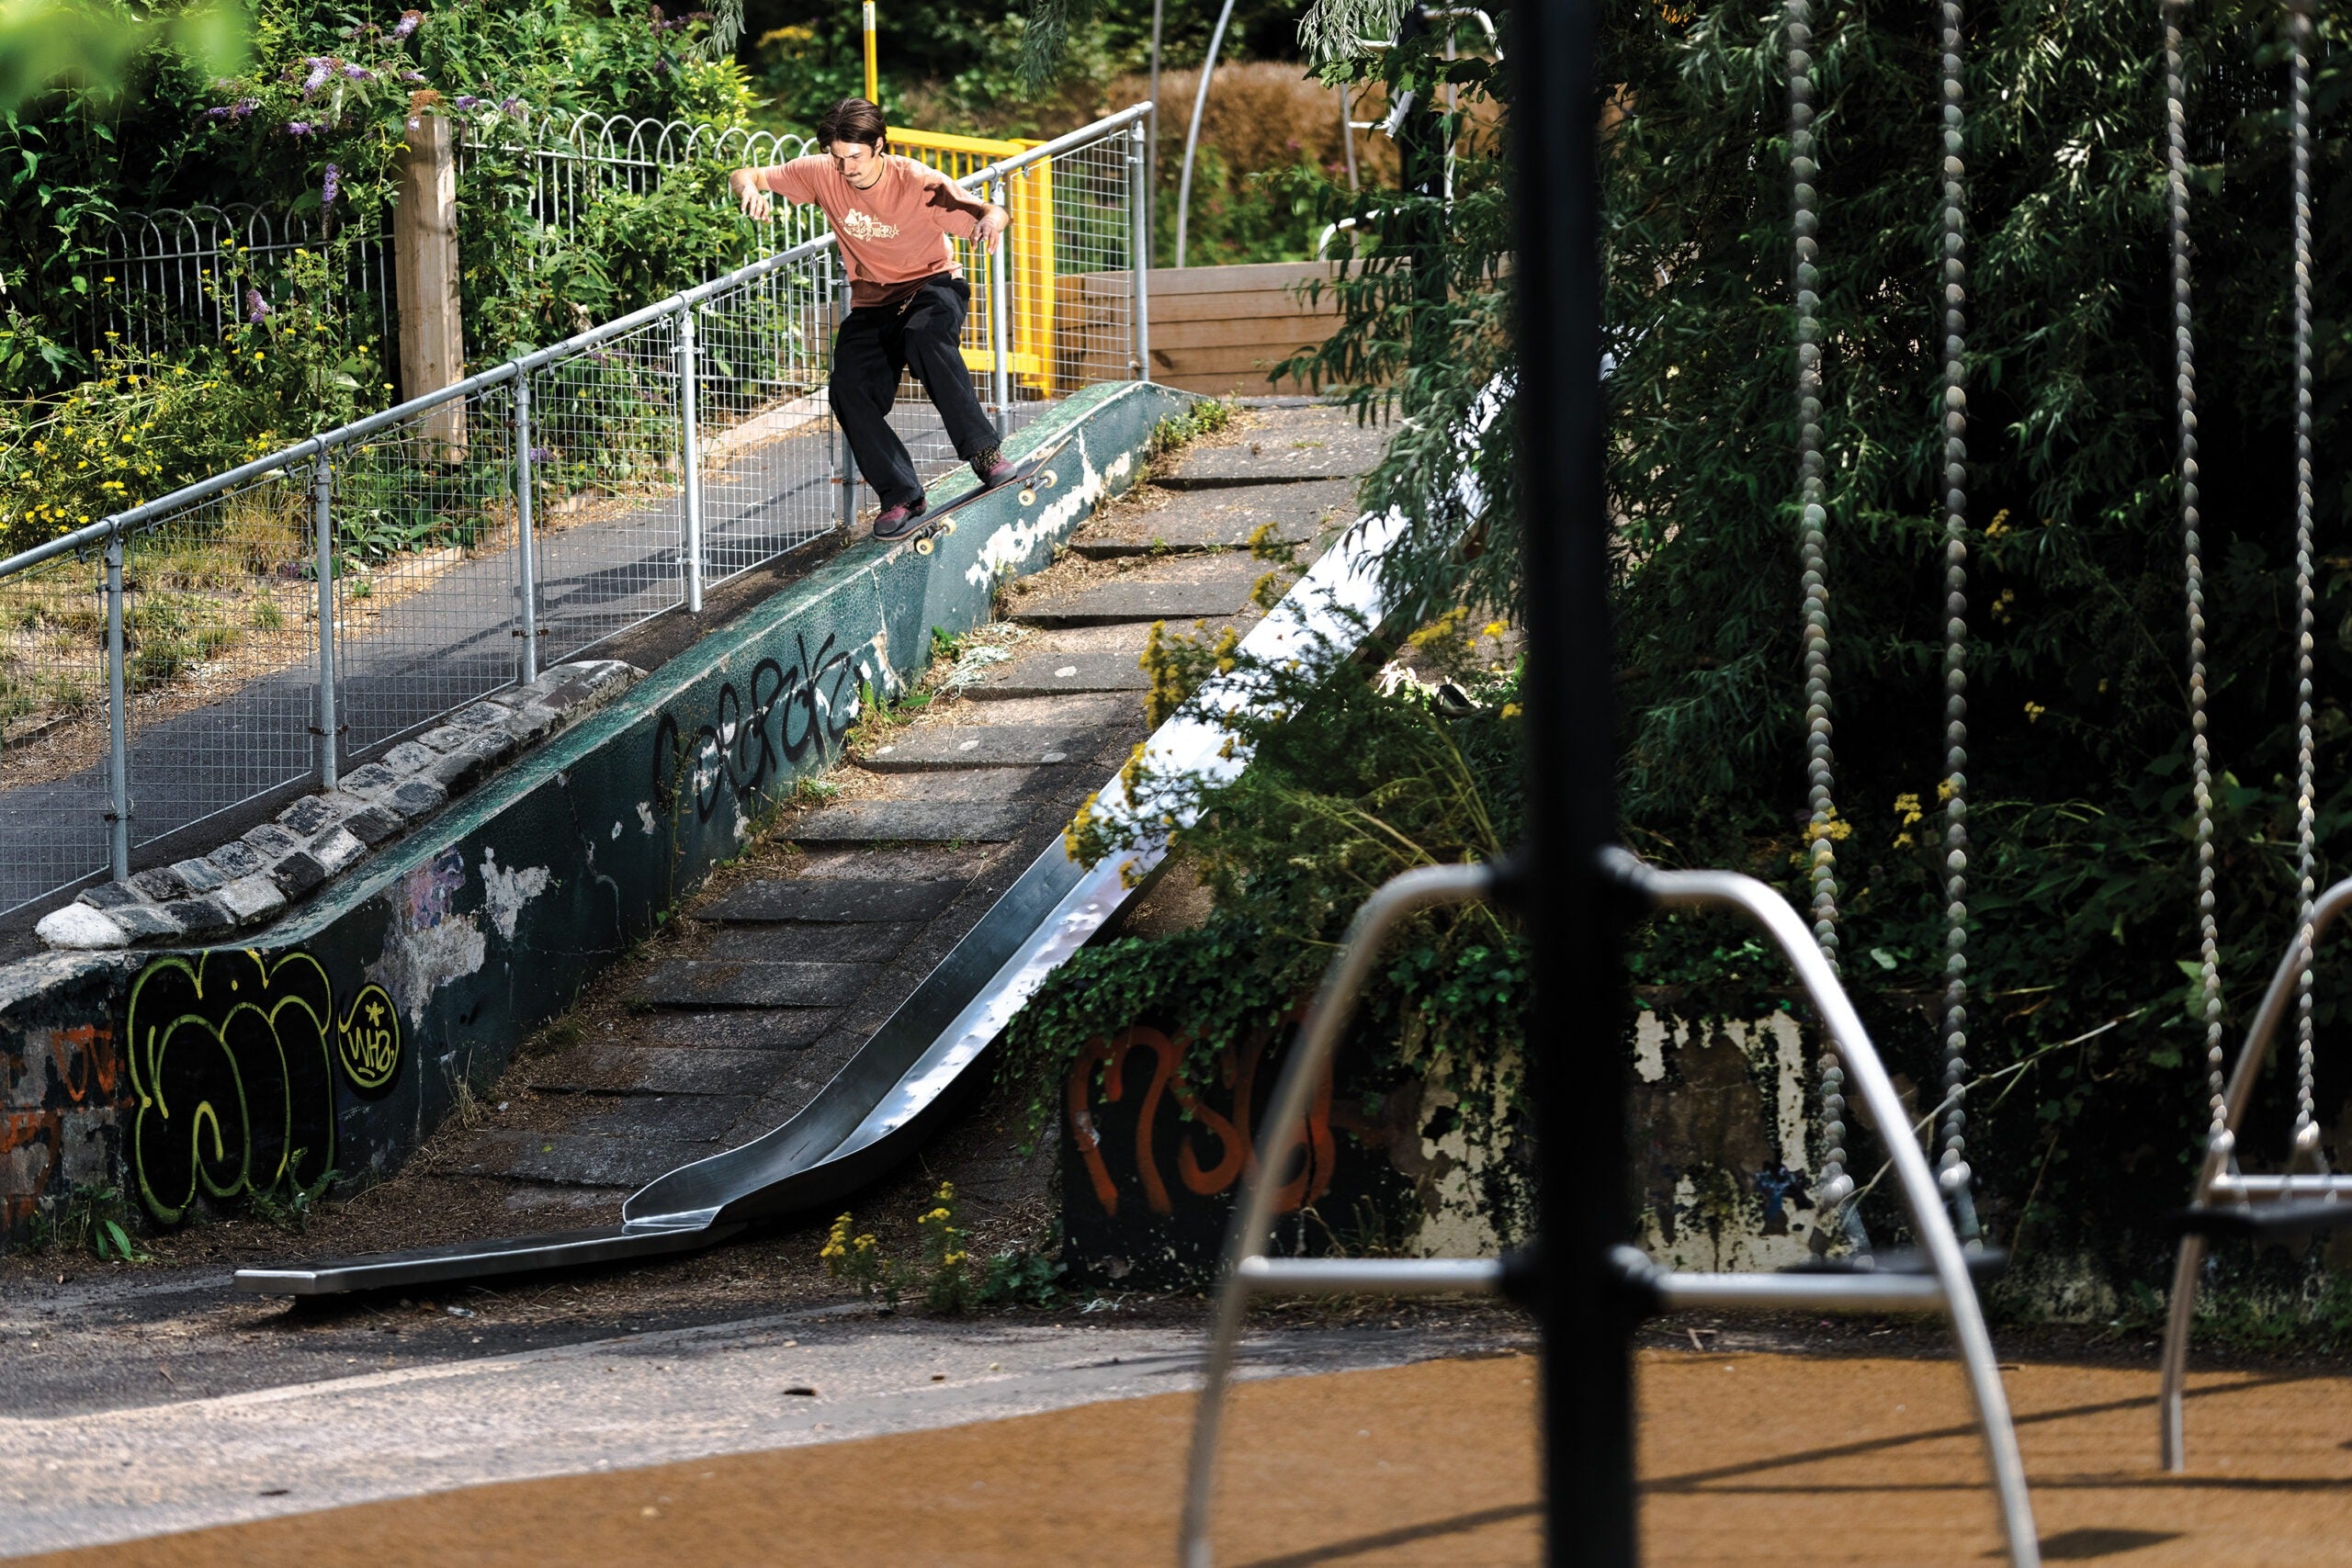 Dougie George Ride-on Frontside Tailslide, photo by Reece Leung - CSC, Cardiff Skateboard Club - UK Skate Store